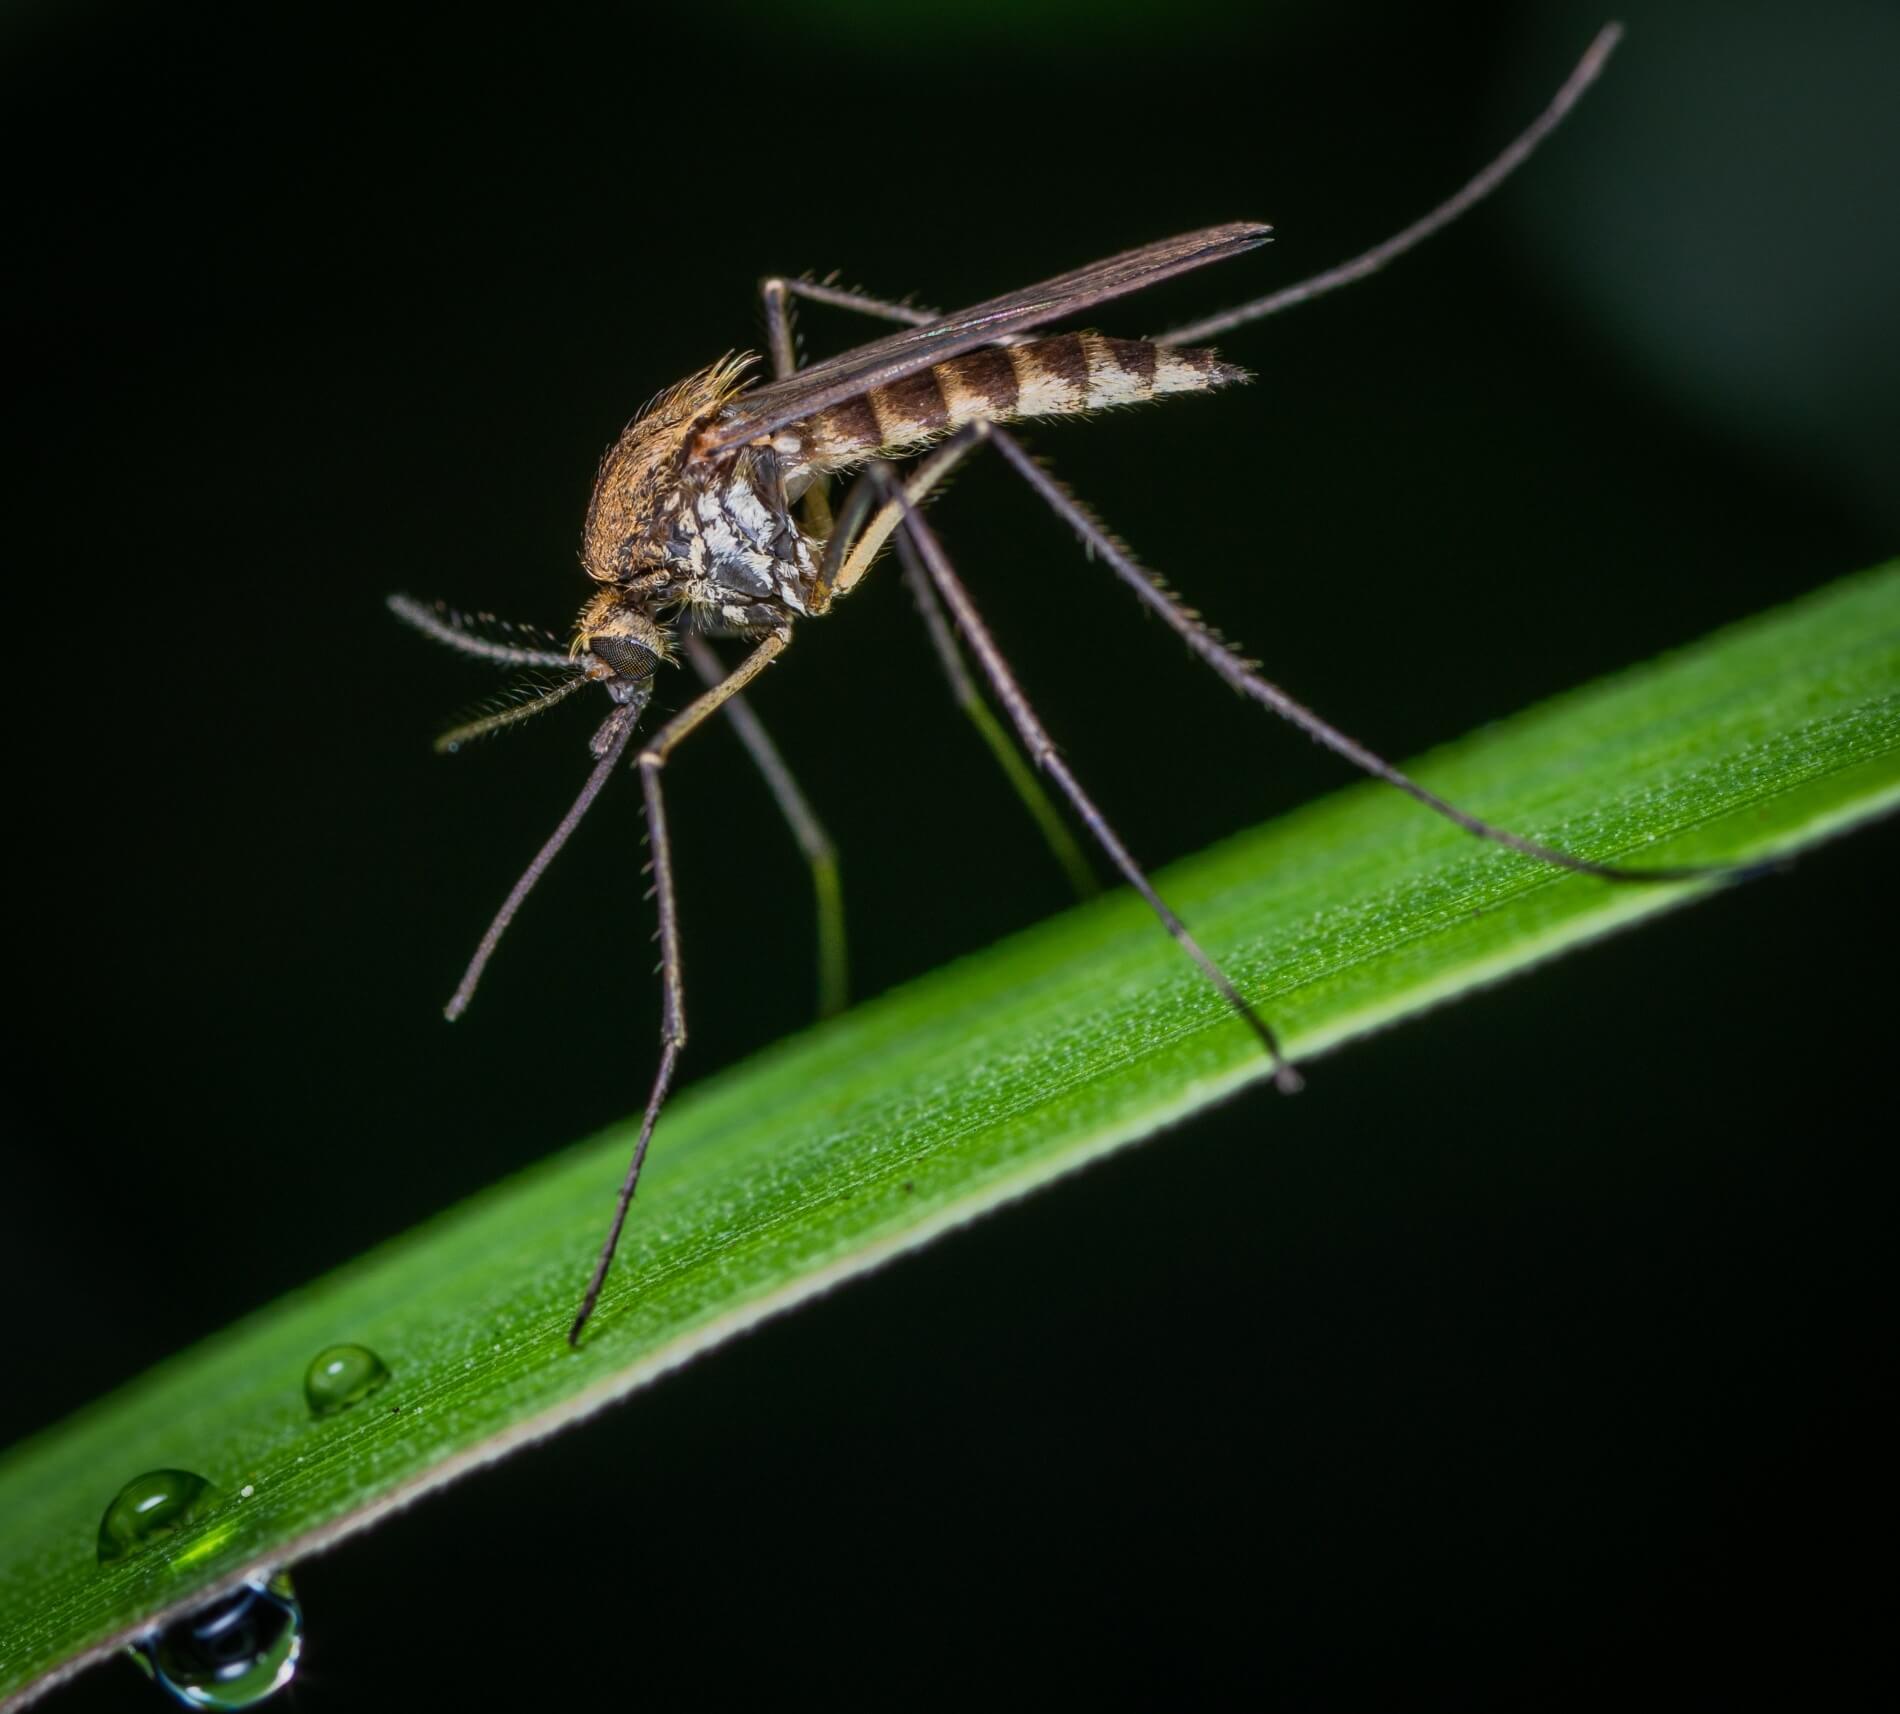 Mosquito sitting on a green stem of a plant